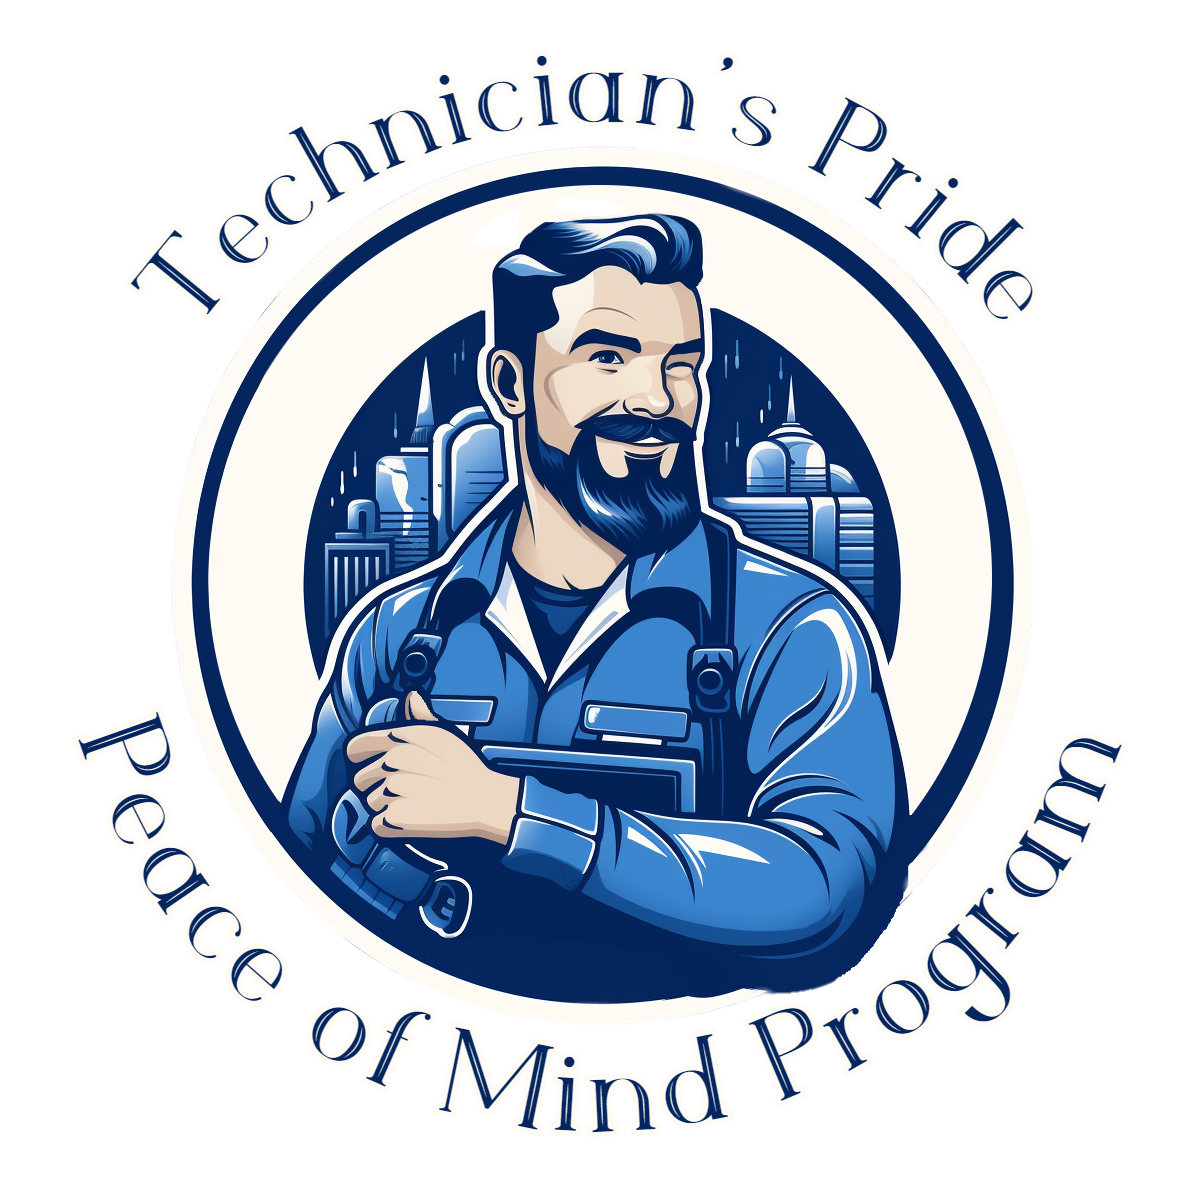 Technician's Pride Peace of Mind Program for Complete AC Systems